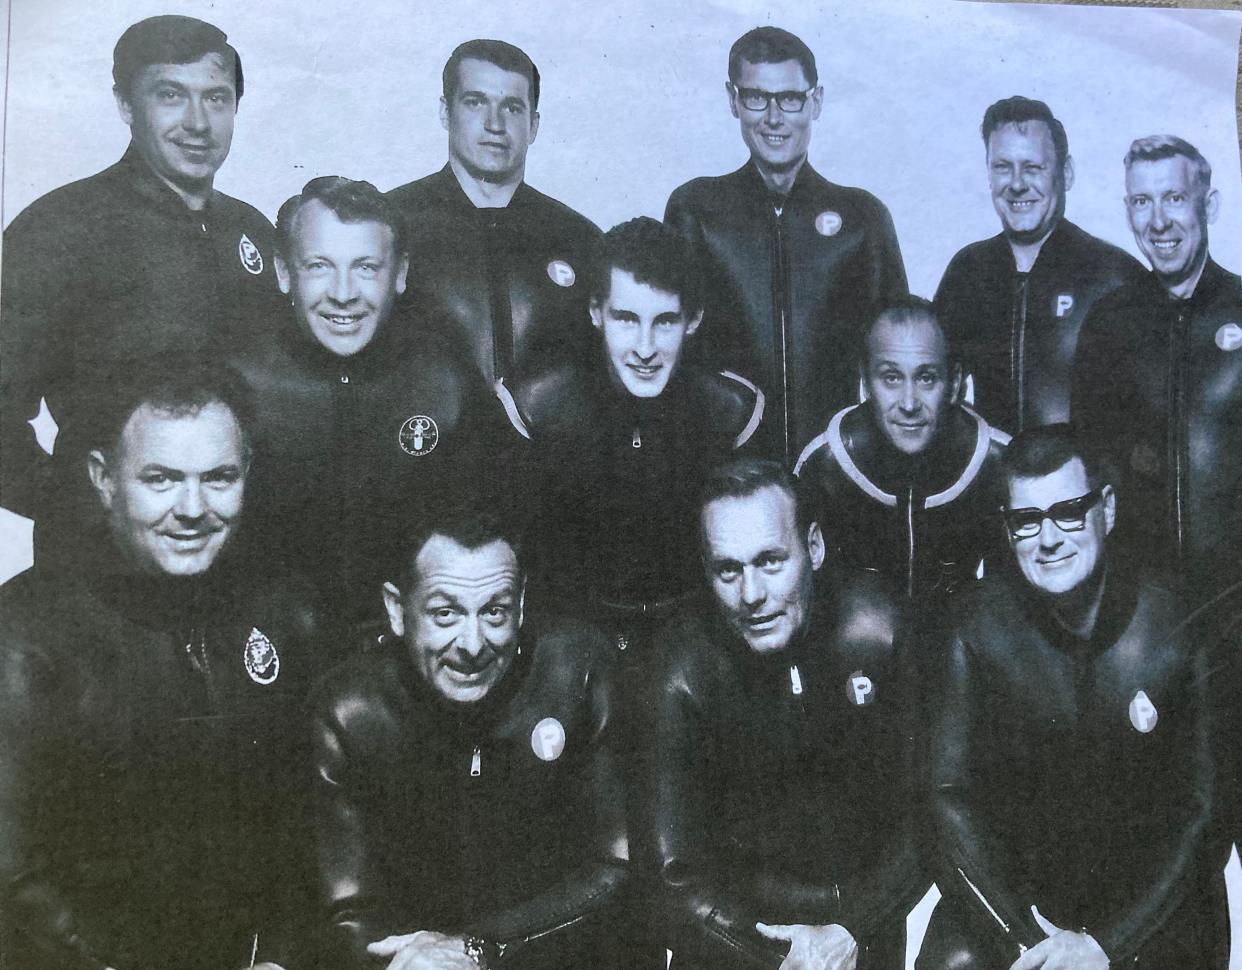 Some members of the Gardner Skin Diving Club. Ray is third from the left in the front row and Armand is second.